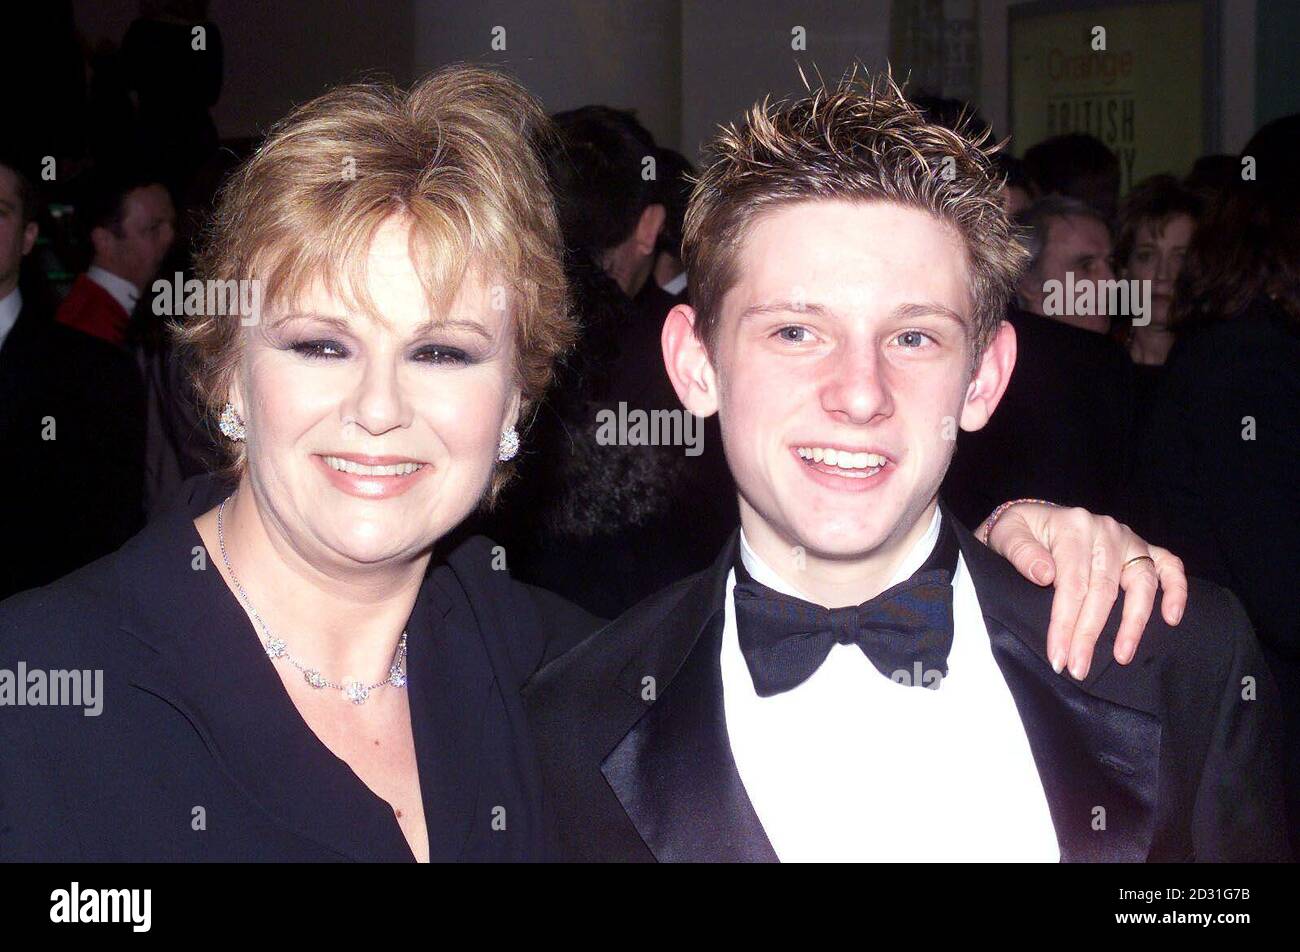 Billy Elliot stars Julie Walters and Jamie Bell during The Orange British Academy Film Awards at the Odeon in London's Leicester Square.  The ceremony has been brought forward several weeks from previous years to give it a more prominent position in the film calendar. Stock Photo